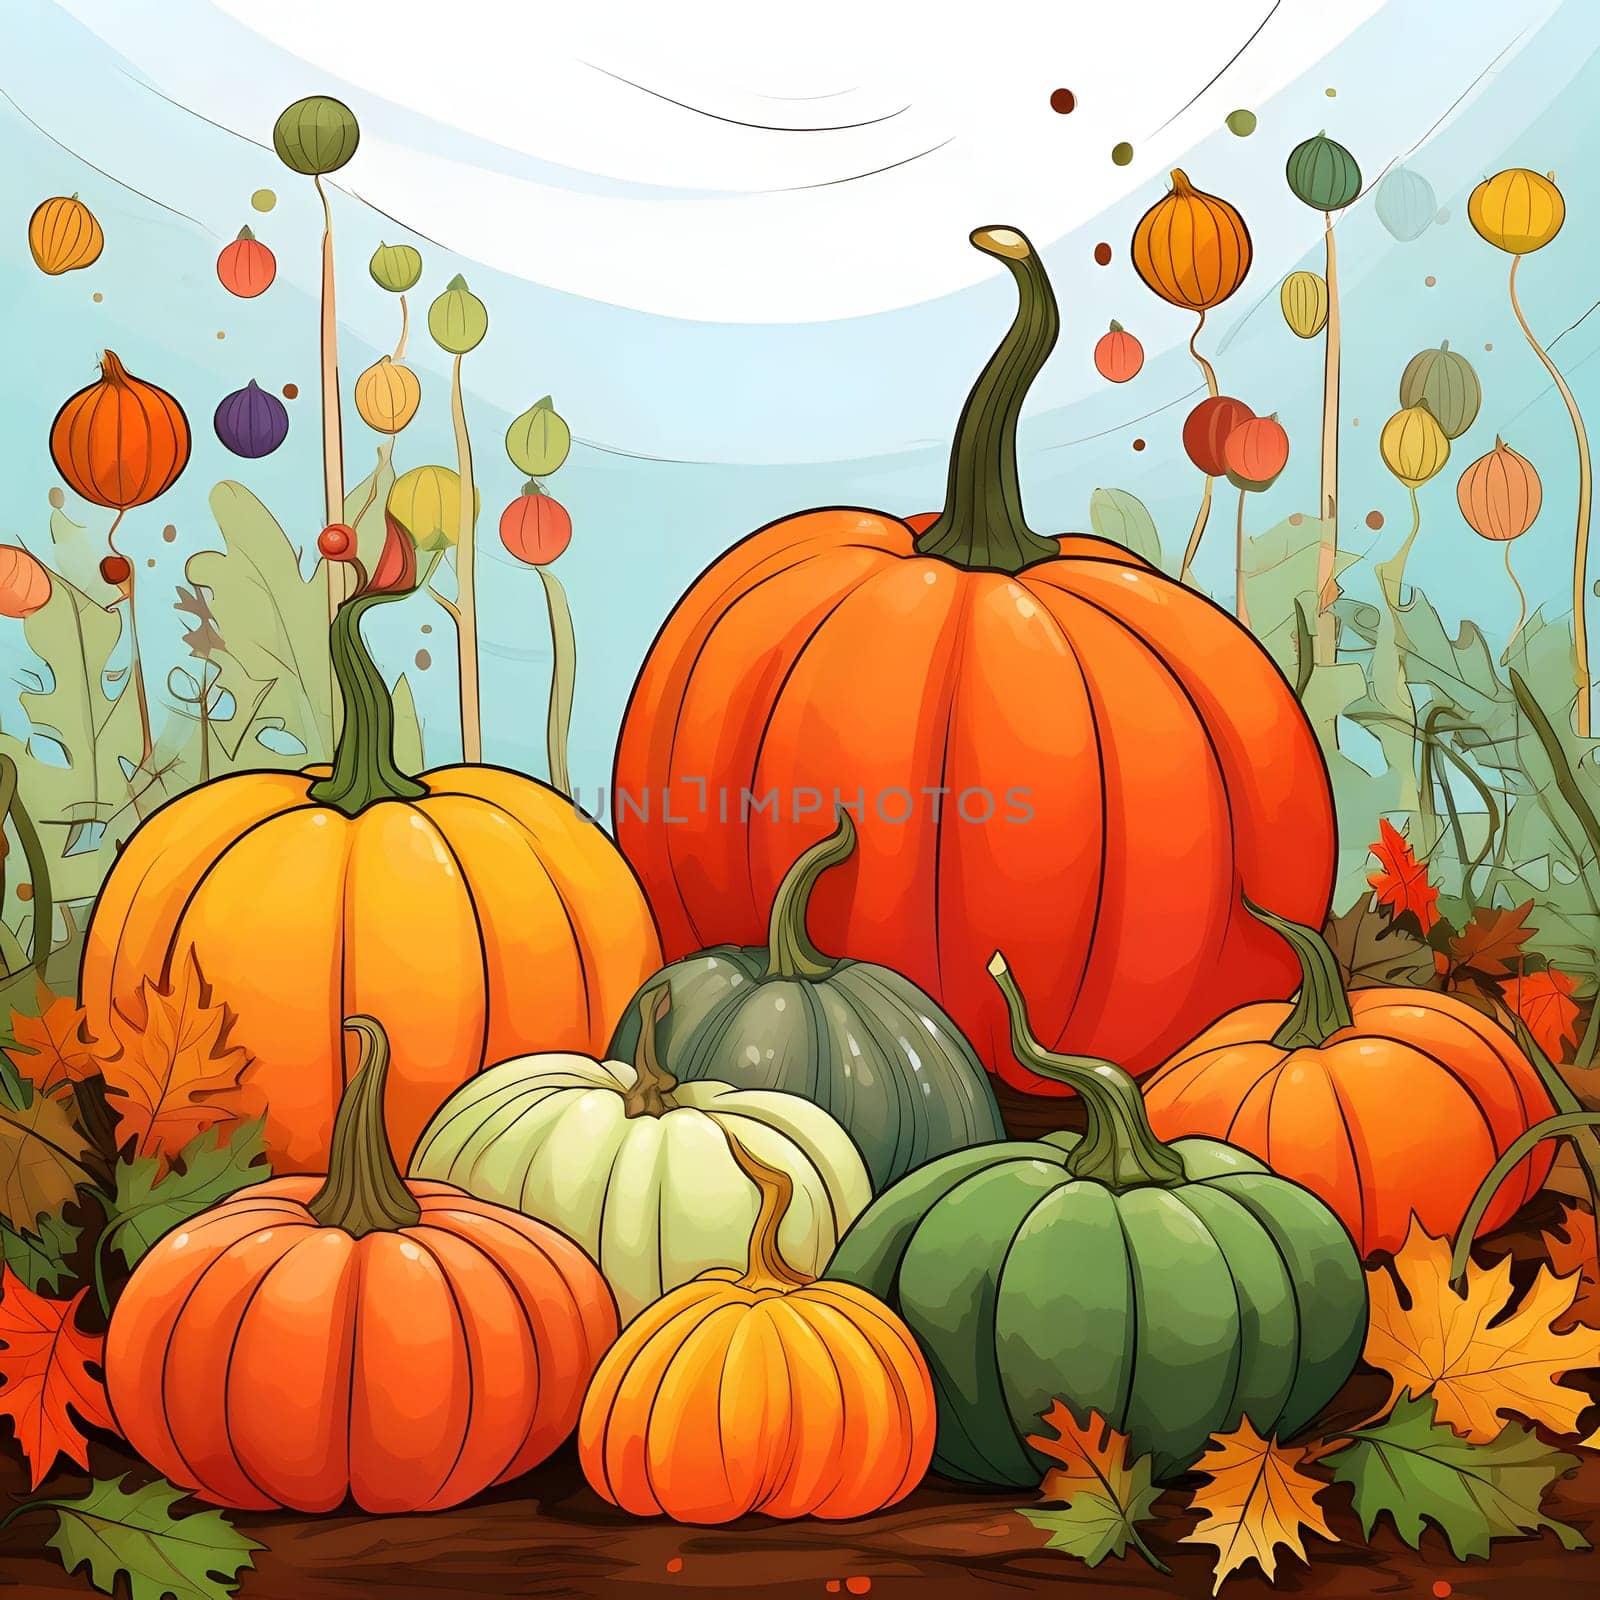 Illustrated pumpkins autumn leaves background, New Year lanterns. Pumpkin as a thanksgiving dish for the harvest. by ThemesS